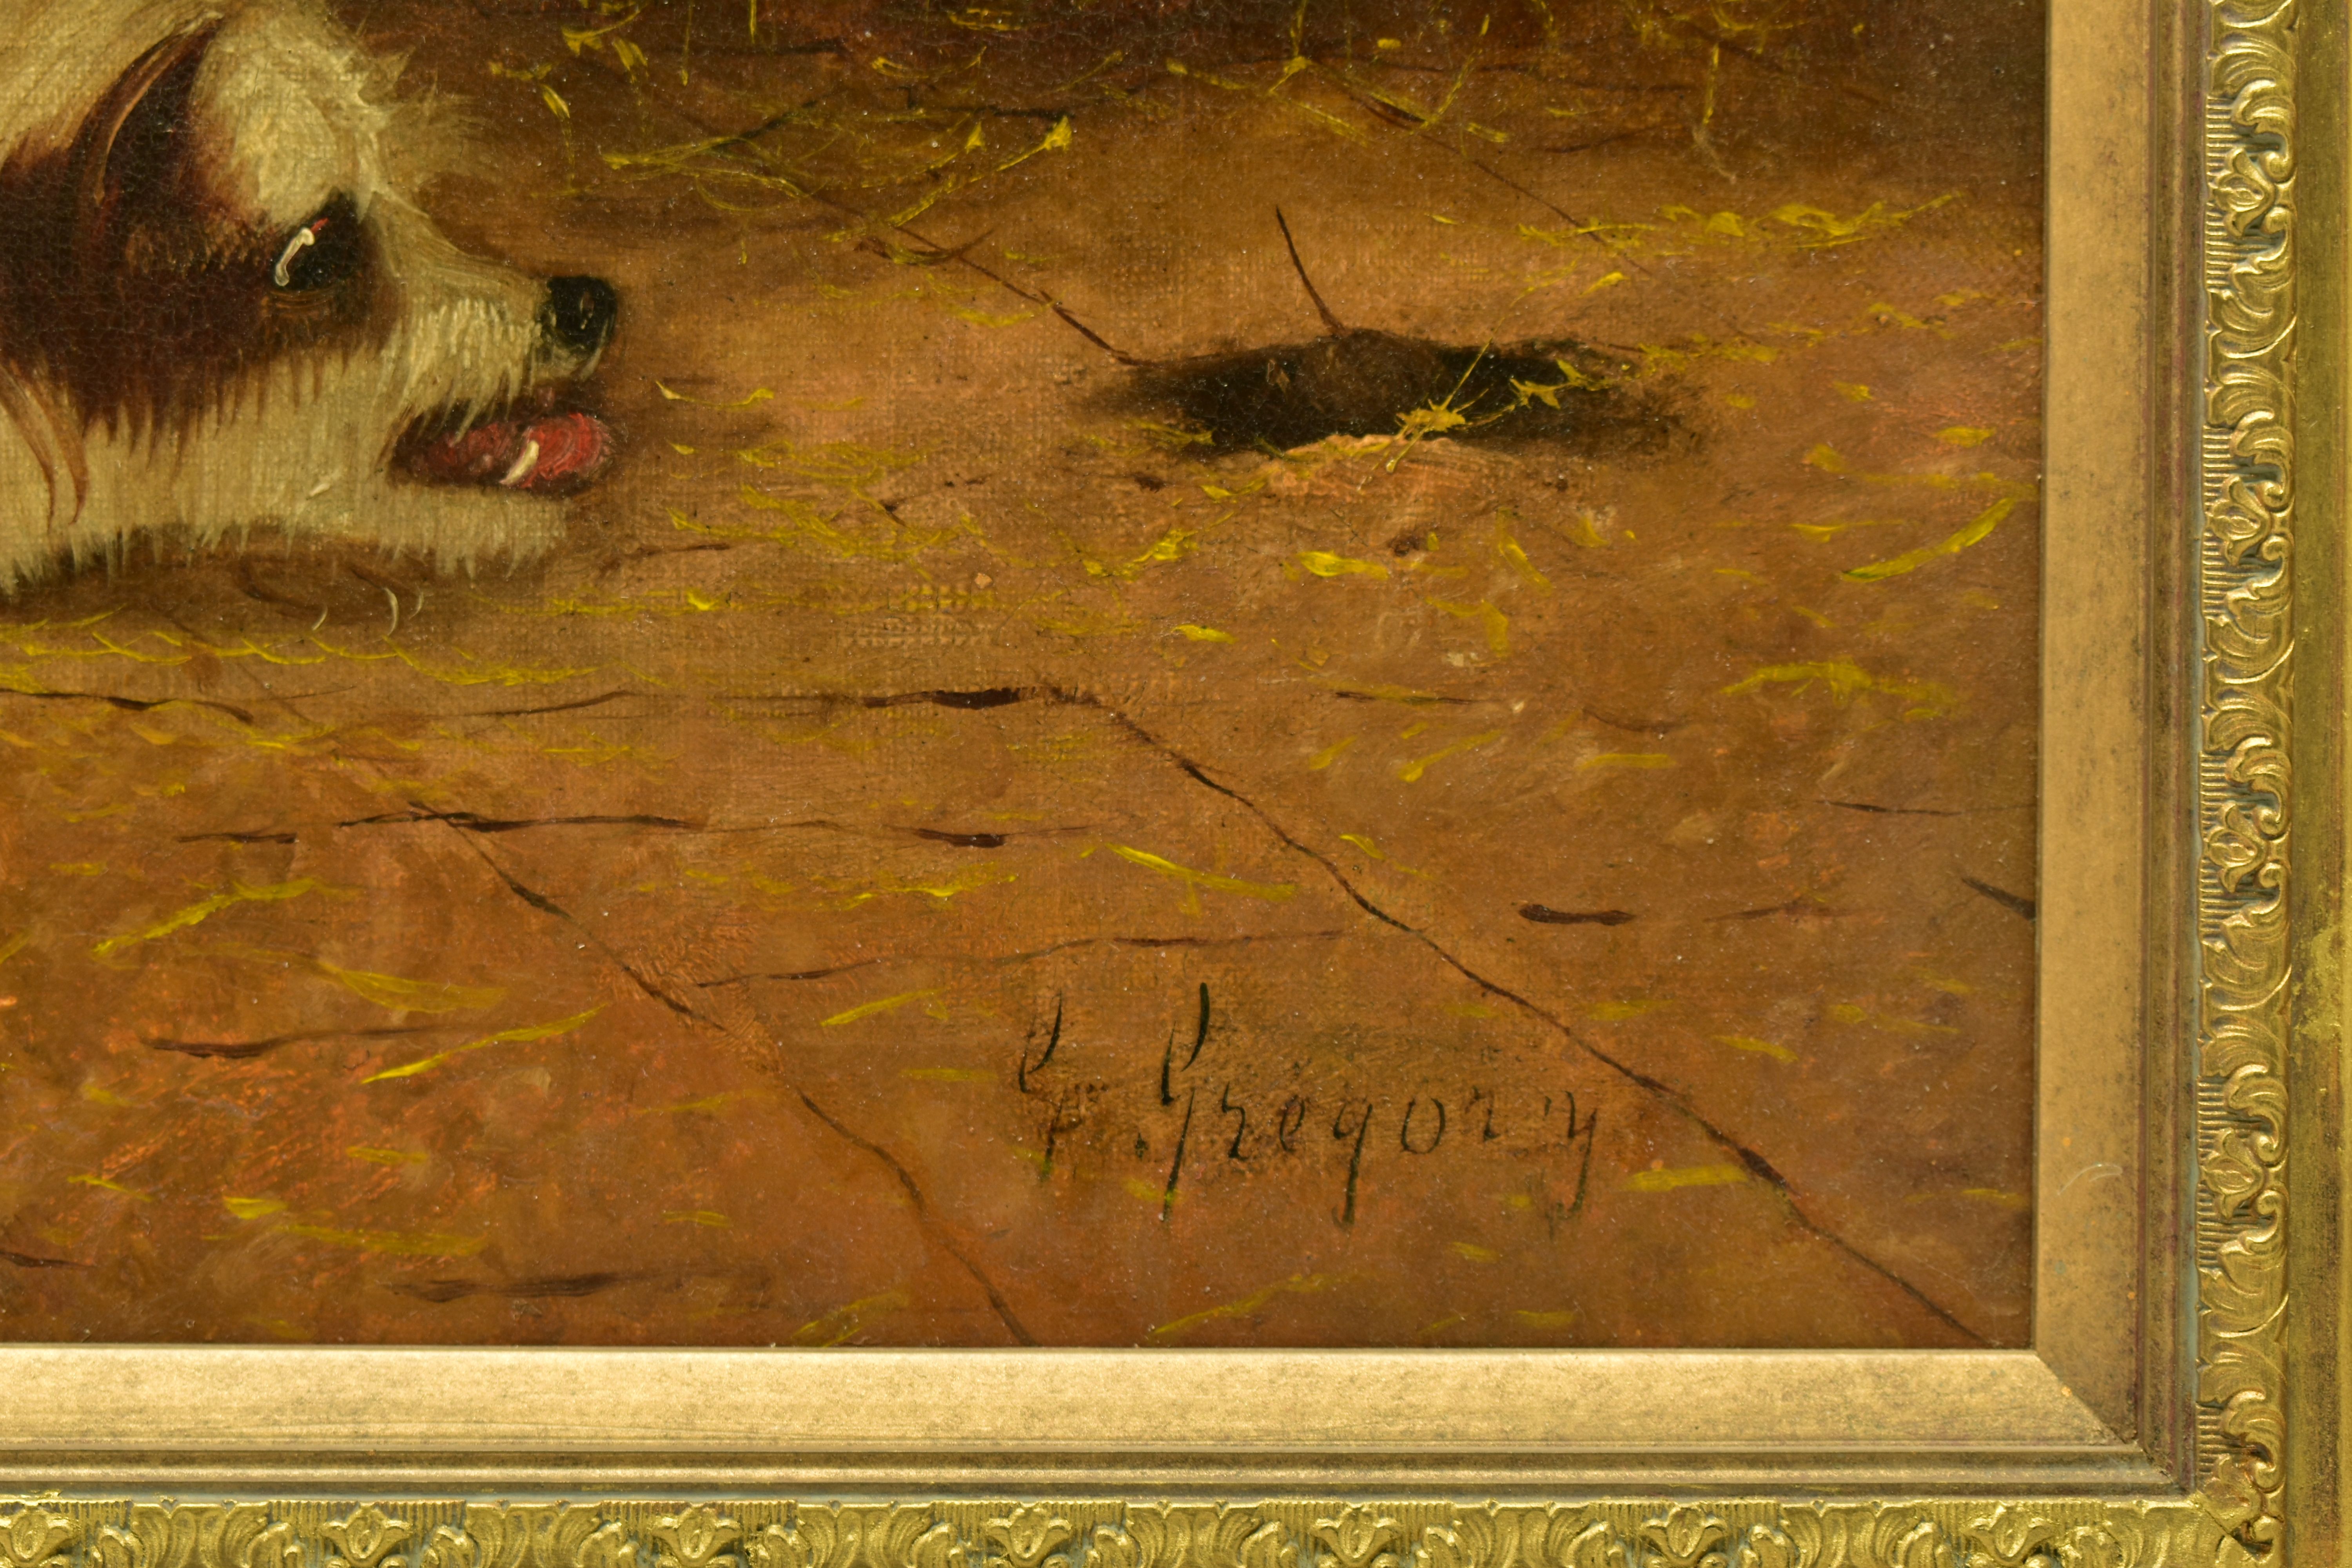 G. GREGORY (19THCENTURY) A TERRIER CHASING A RAT, a depiction of a terrier in a barn chasing a rat - Image 4 of 6